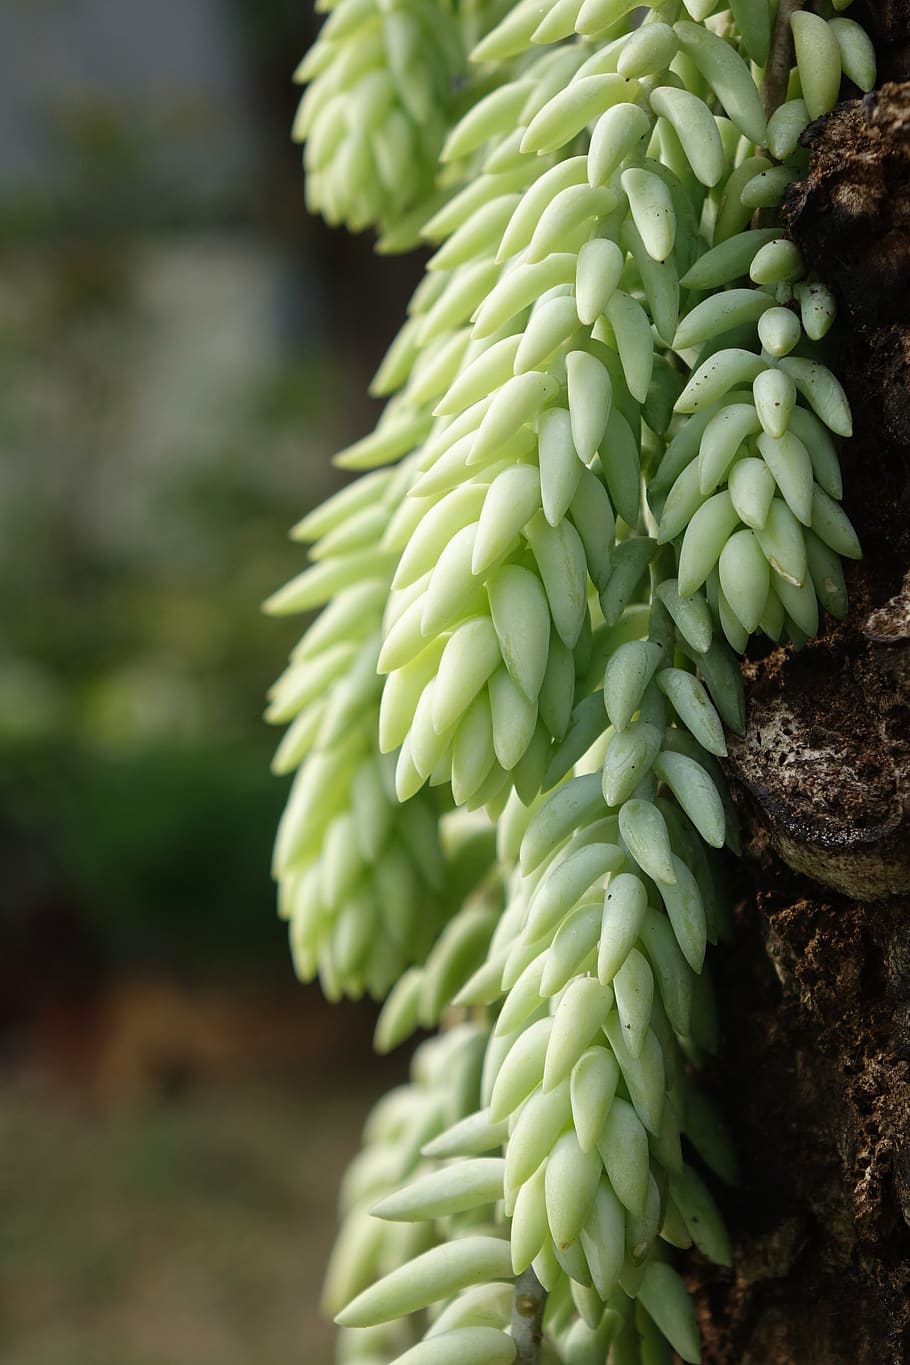 plant, nature, jade, growth, green color, freshness, close-up, day, food and drink, food